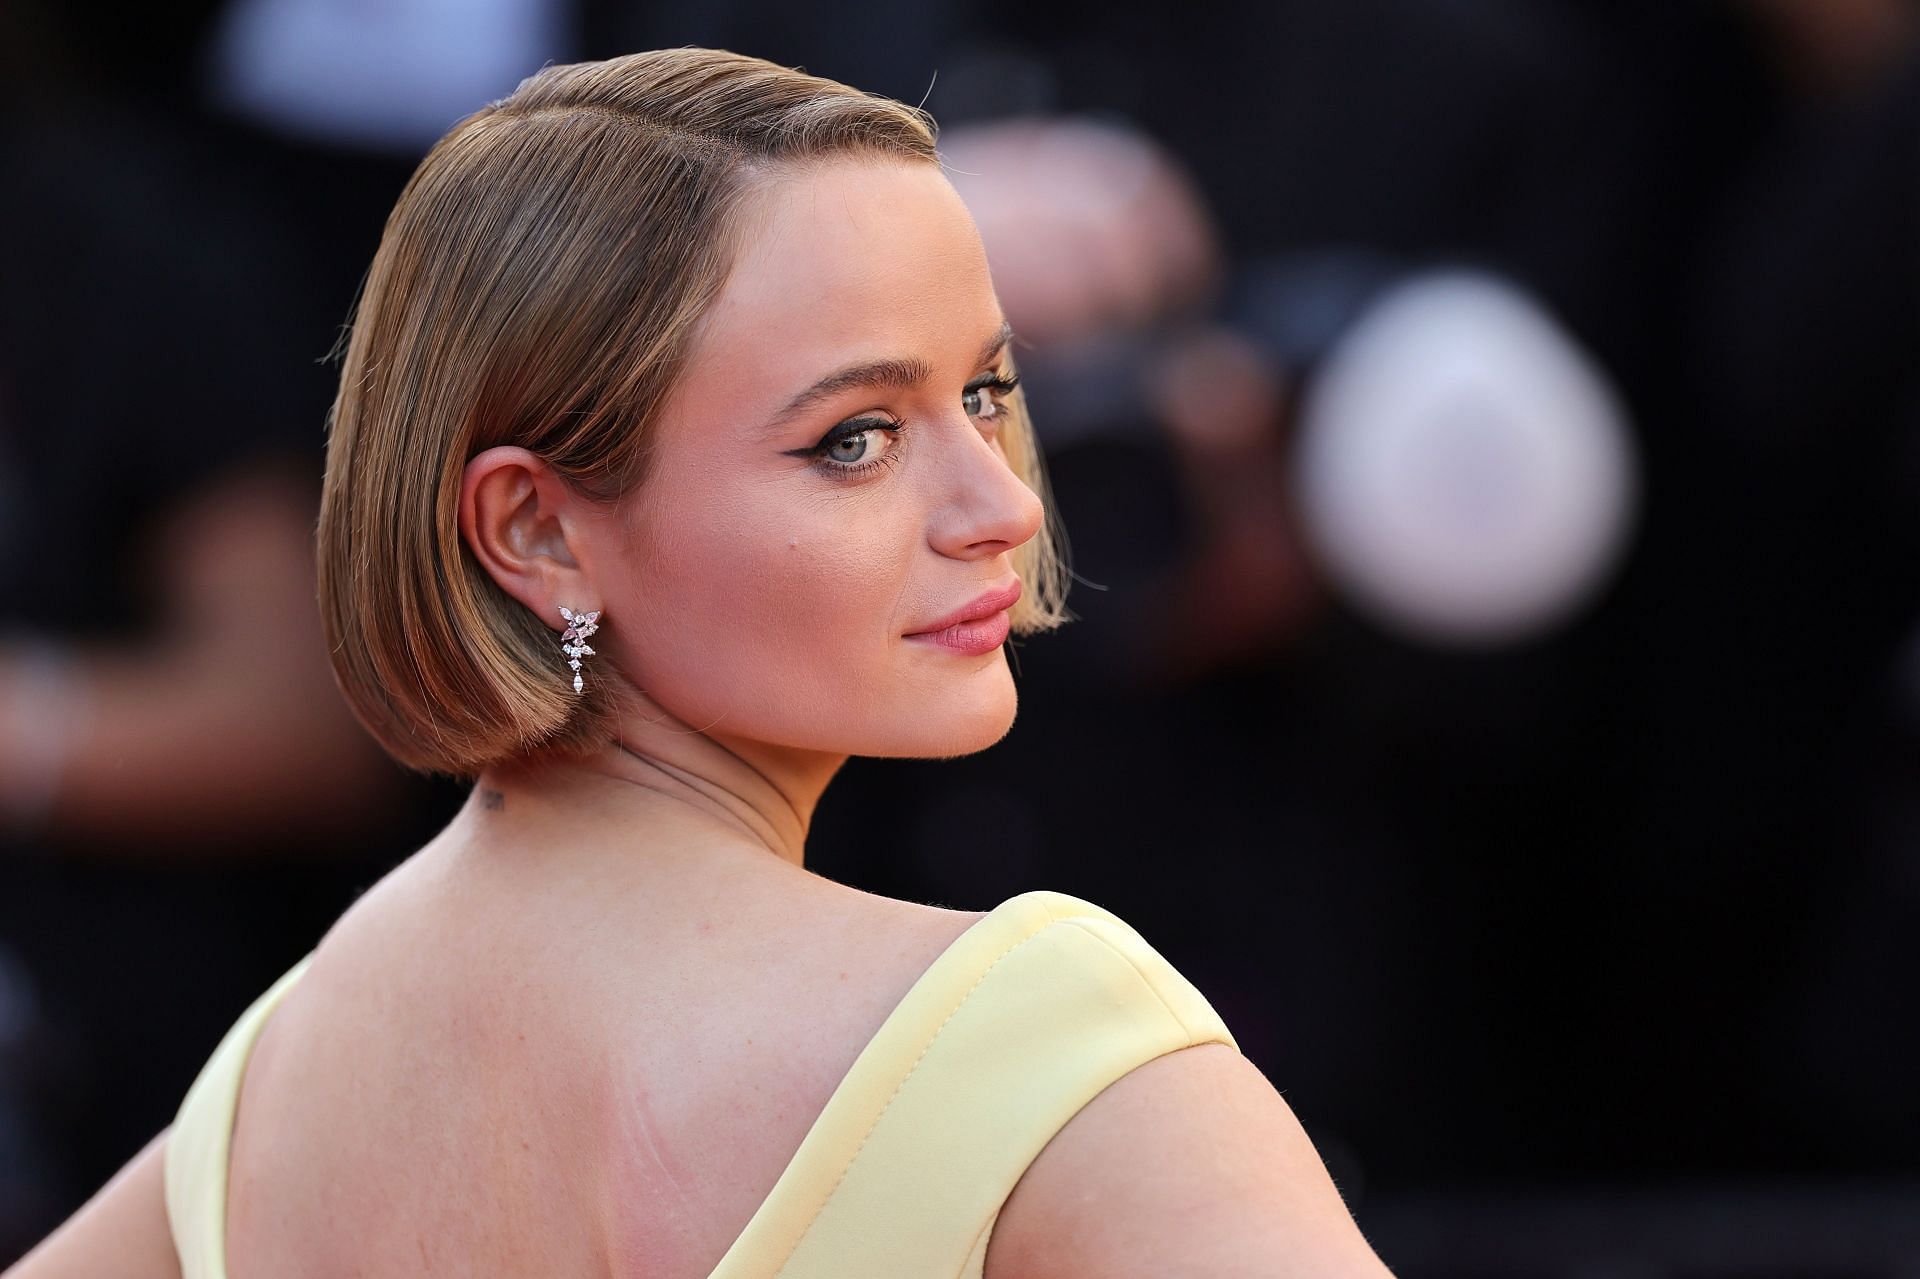 Joey King will star in the upcoming movie (Image via Neilson Barnard/Getty Images)